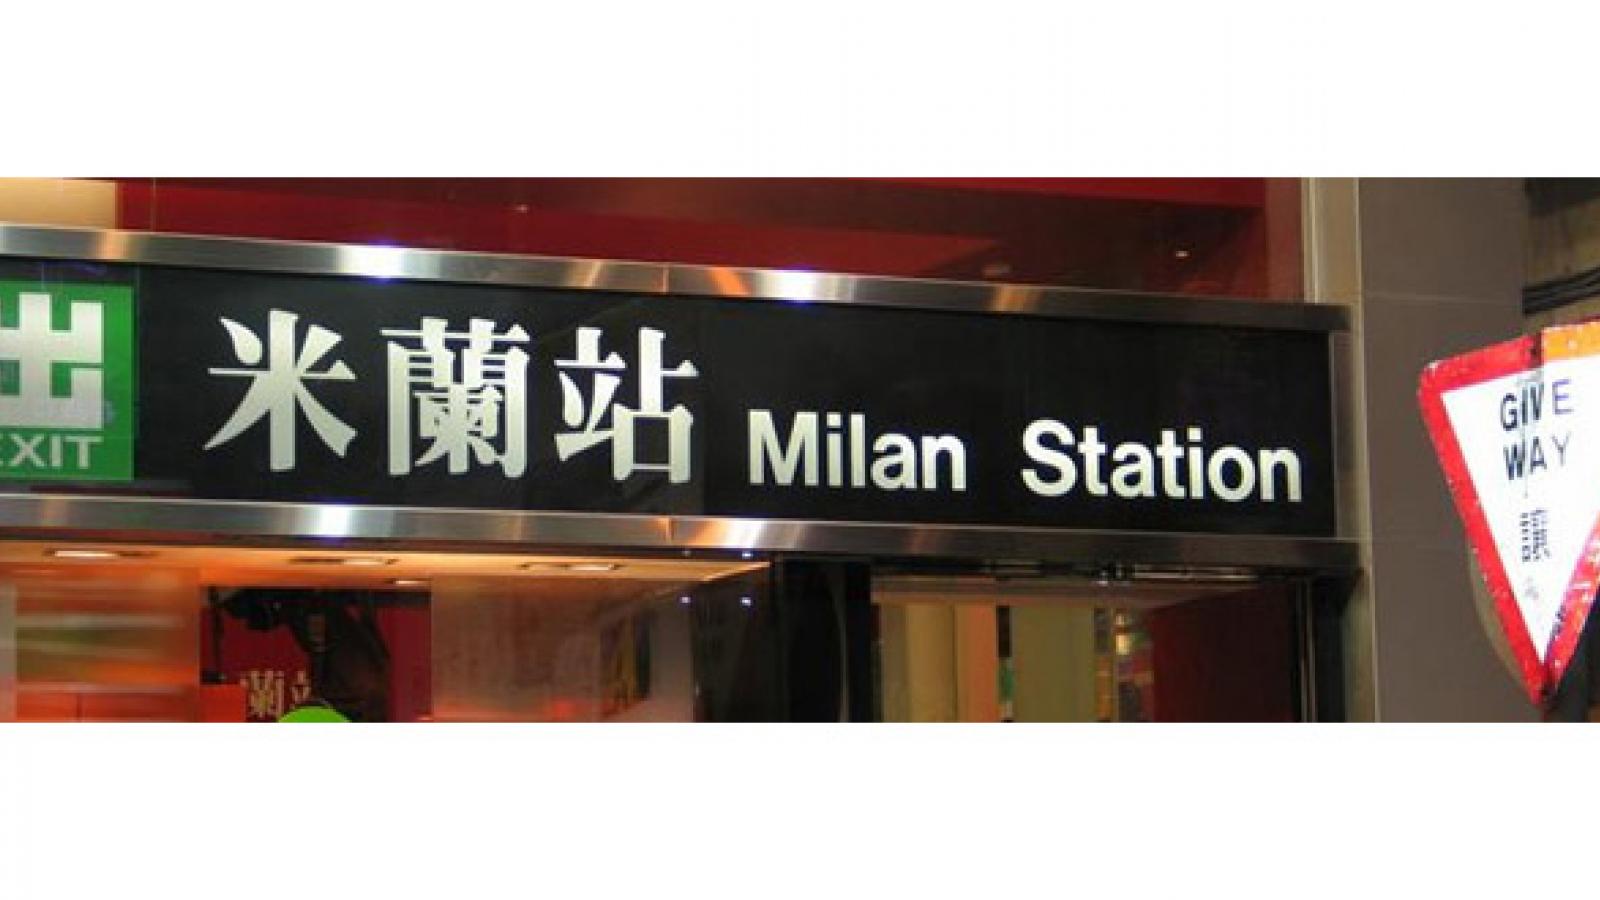 A subway sign for Milan Station in an East Asian country.